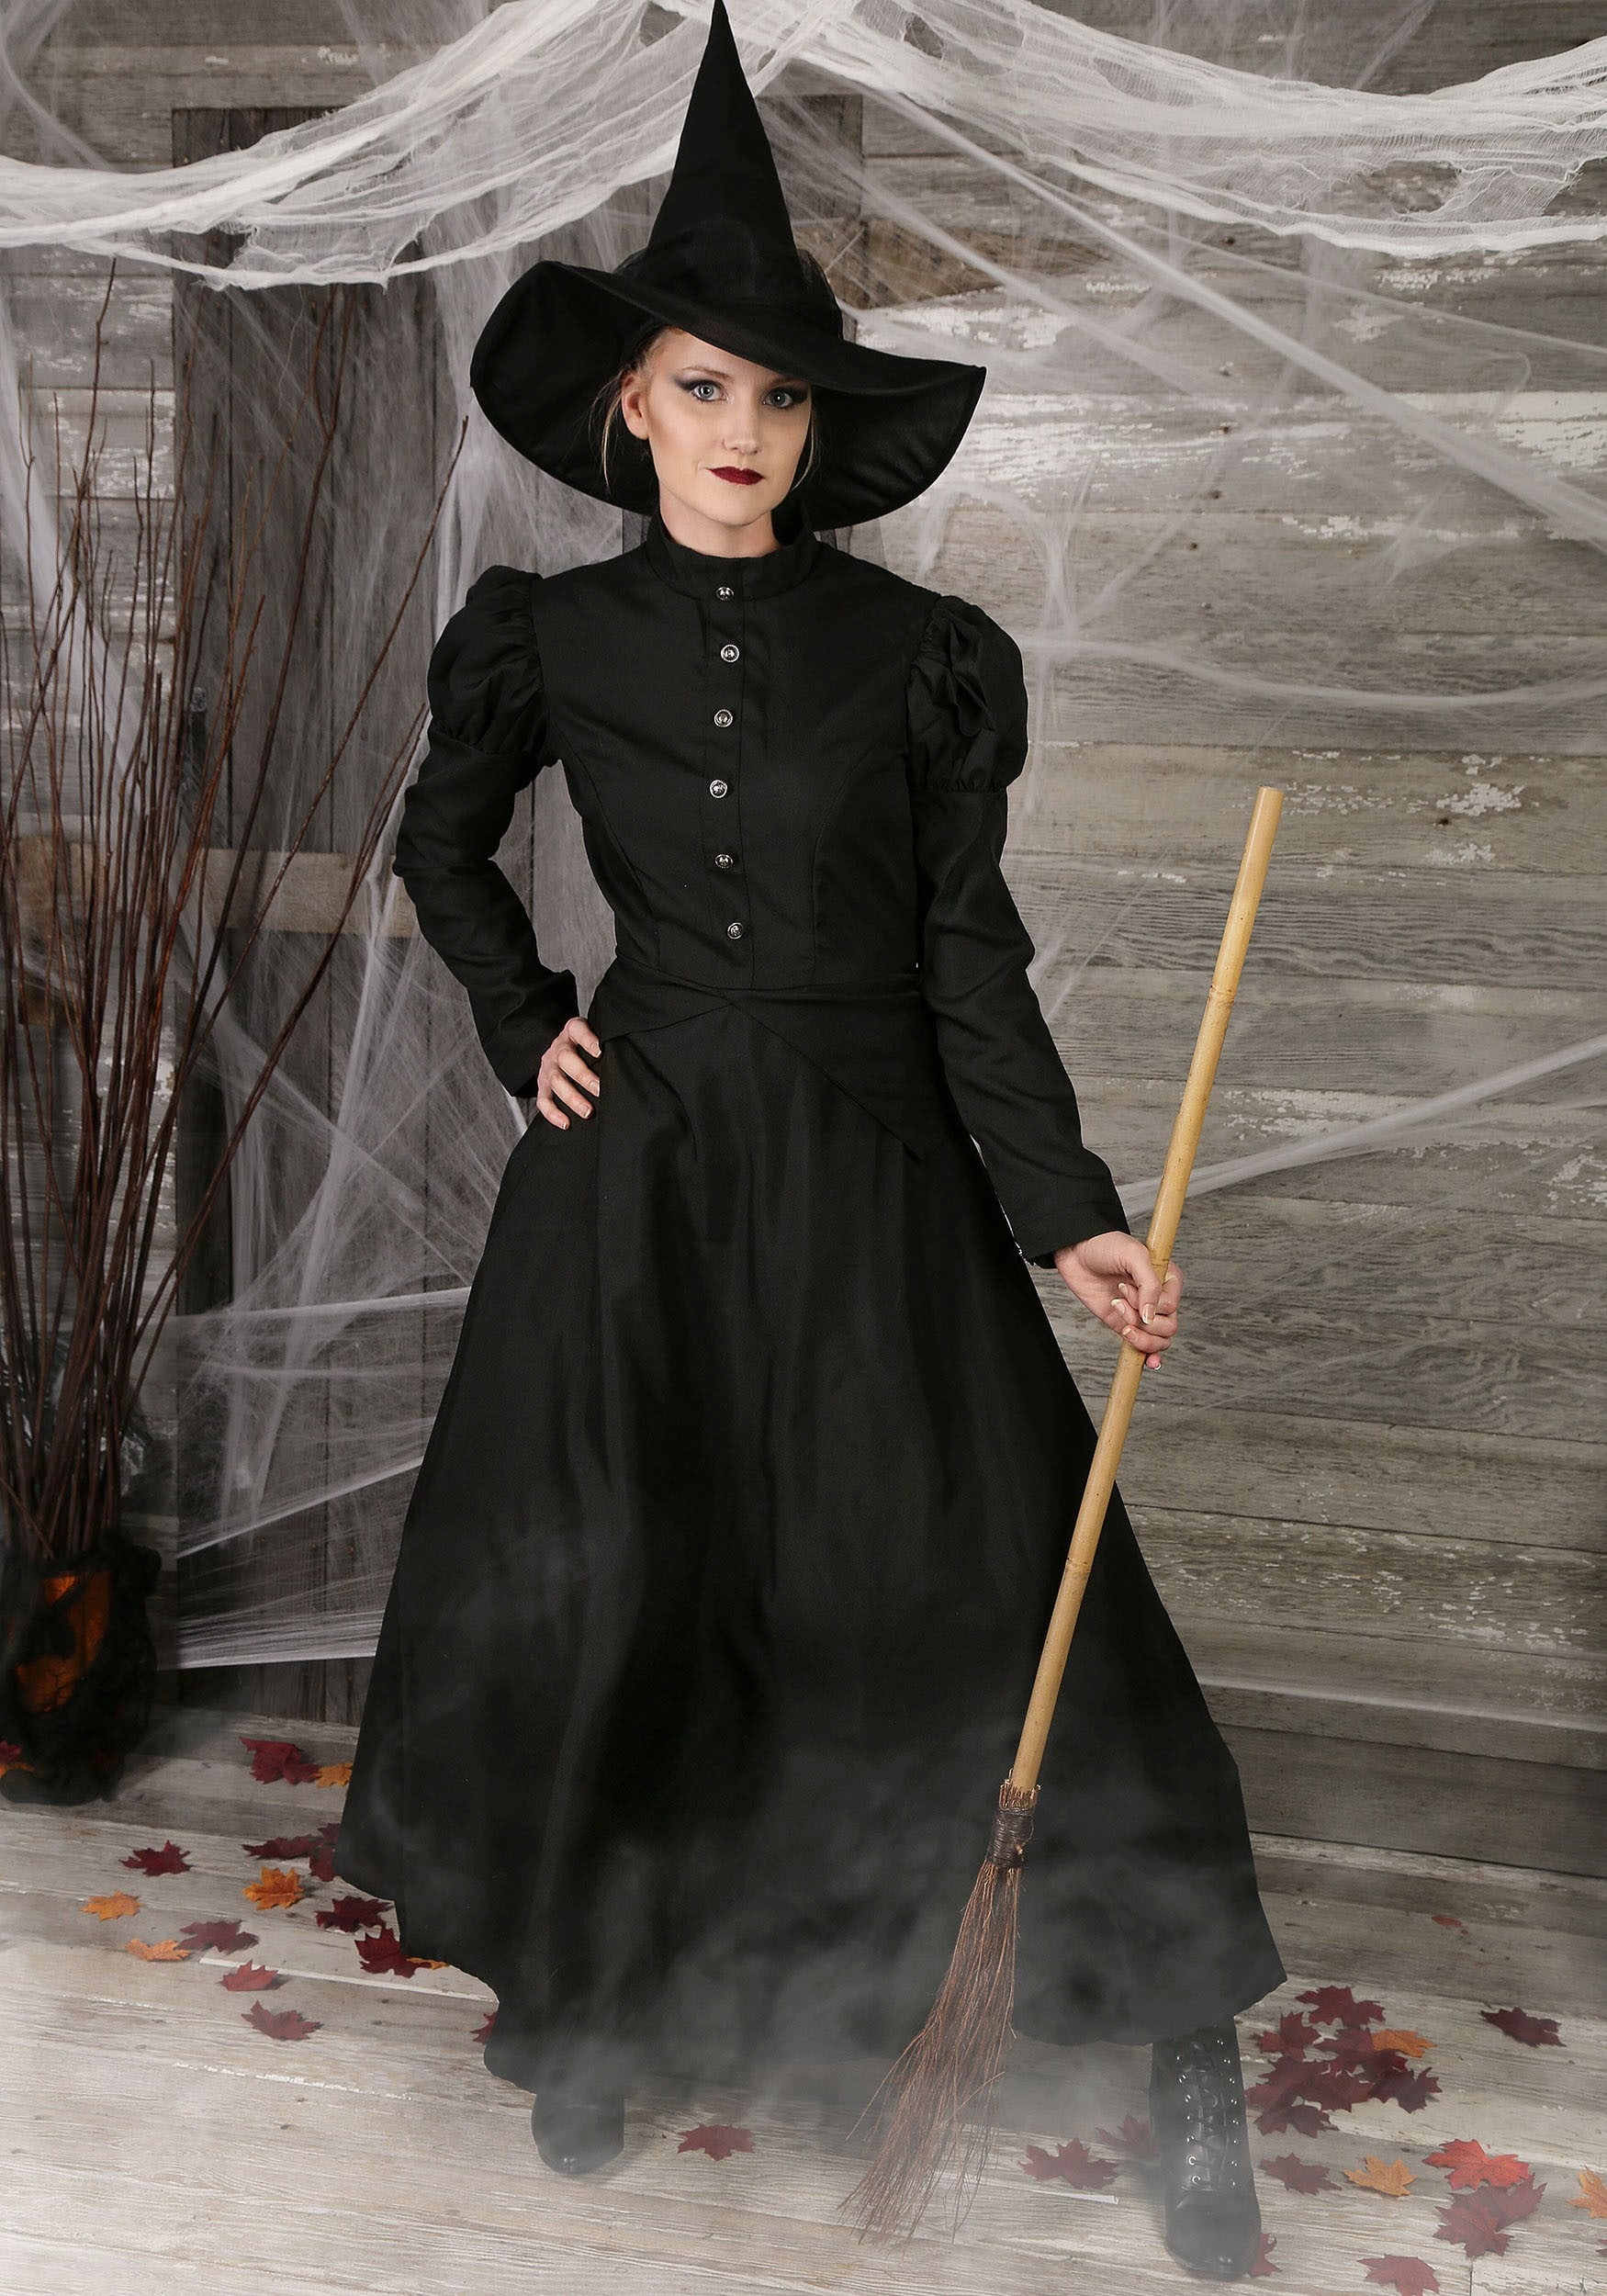 Lady Witch Dress Sorceress Costume with Witch Hat for Halloween